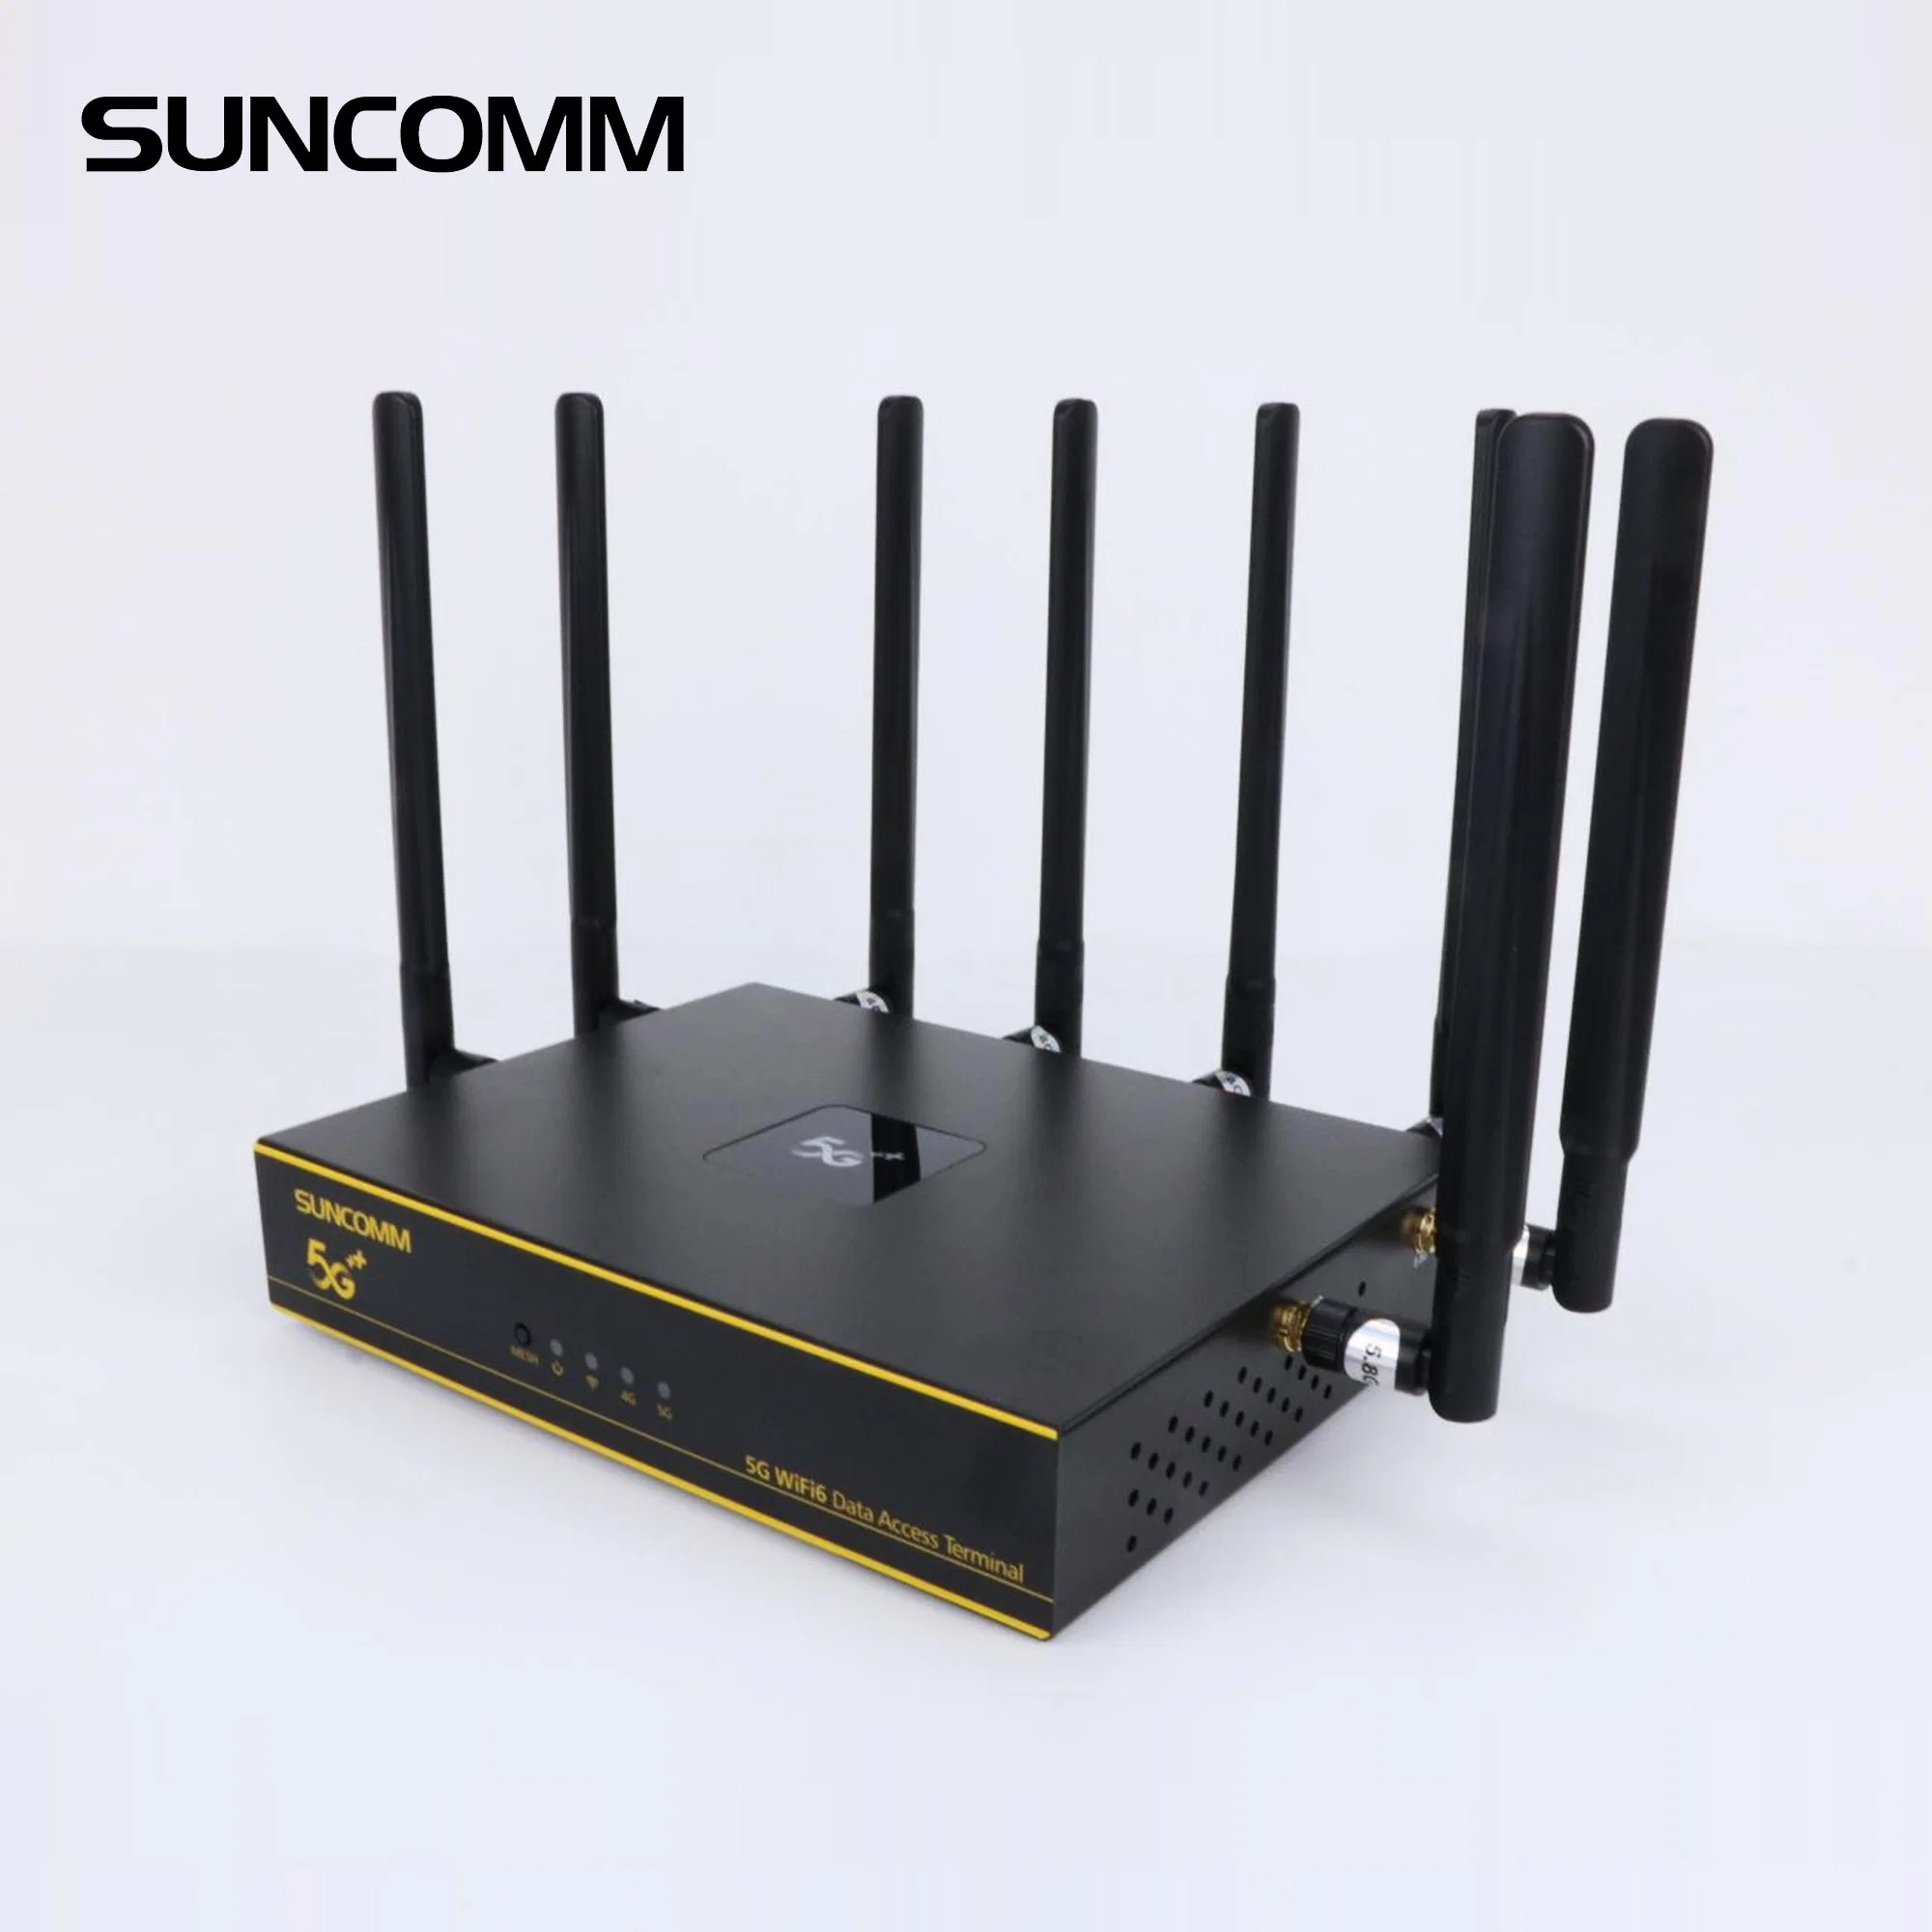 Hot Selling 5g CPE WiFi Router with SIM Card Slot External Antenna Suncomm O2 Mesh Home Enterprise Routeur Modem 5g